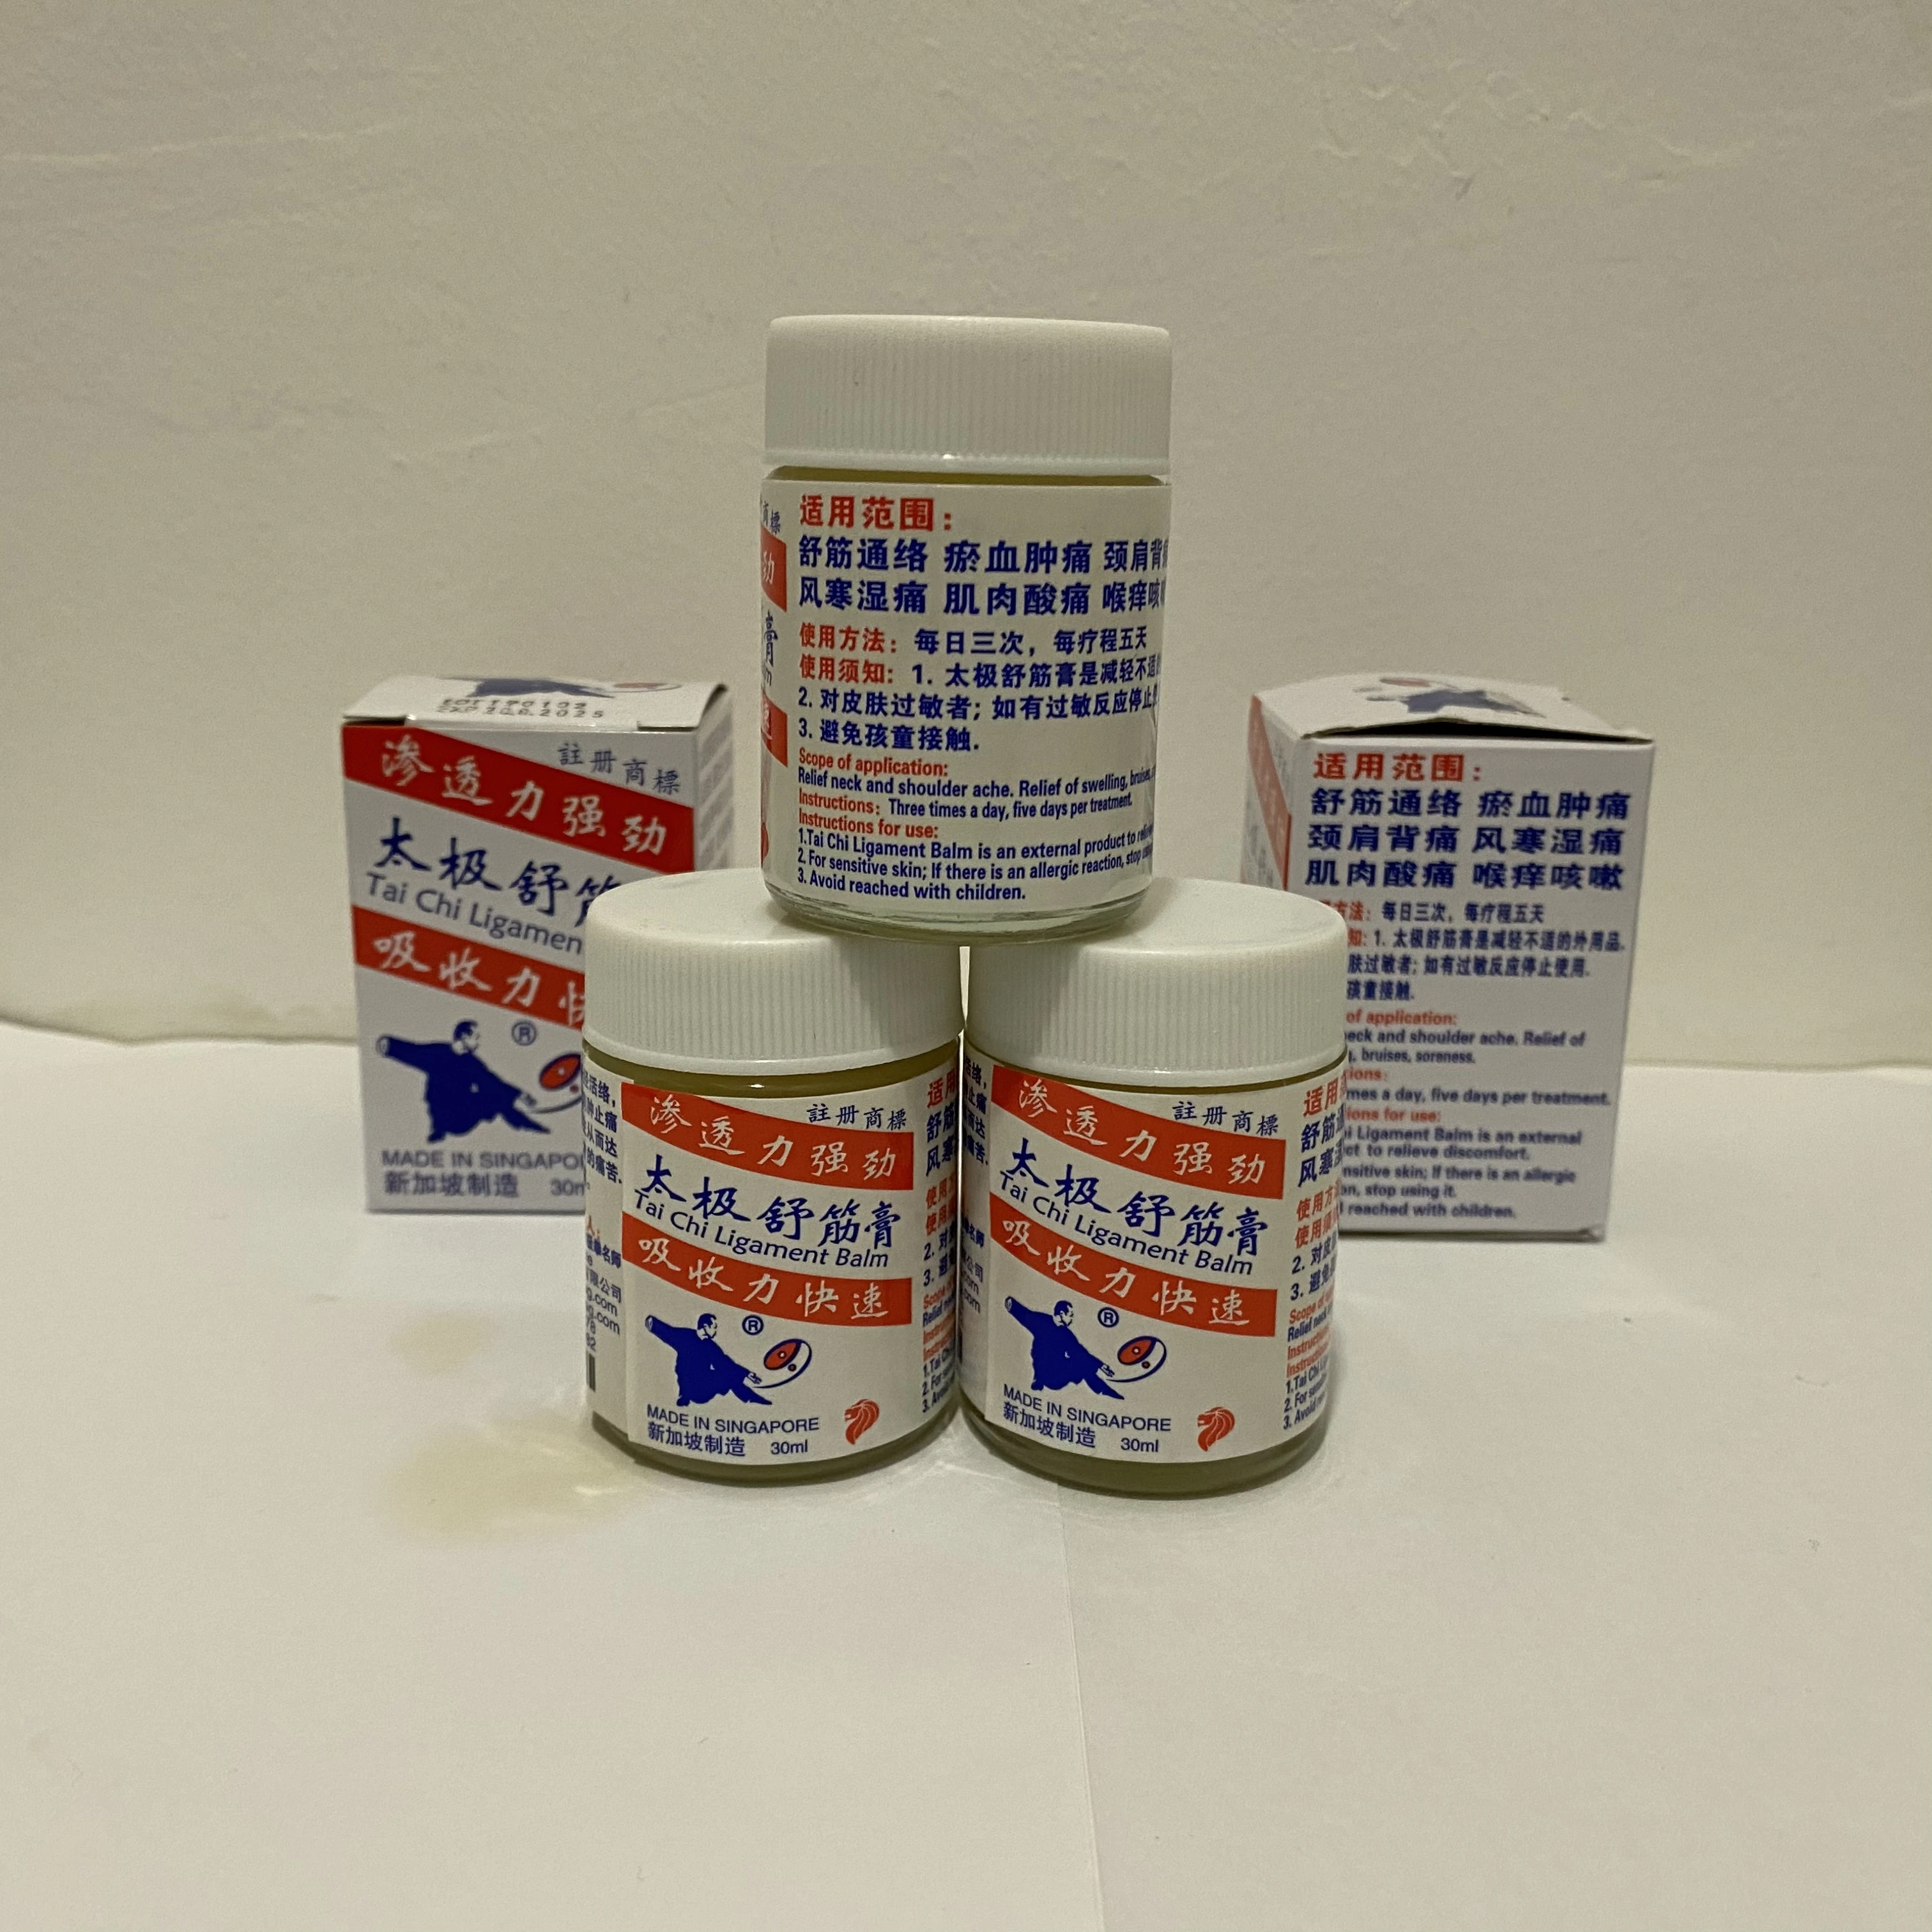 Shoulder Pain Relief And Joint Pain Angelica Dahurica Ligusticum Chuanxiong Tai Chi Ligament Balm From Singapore